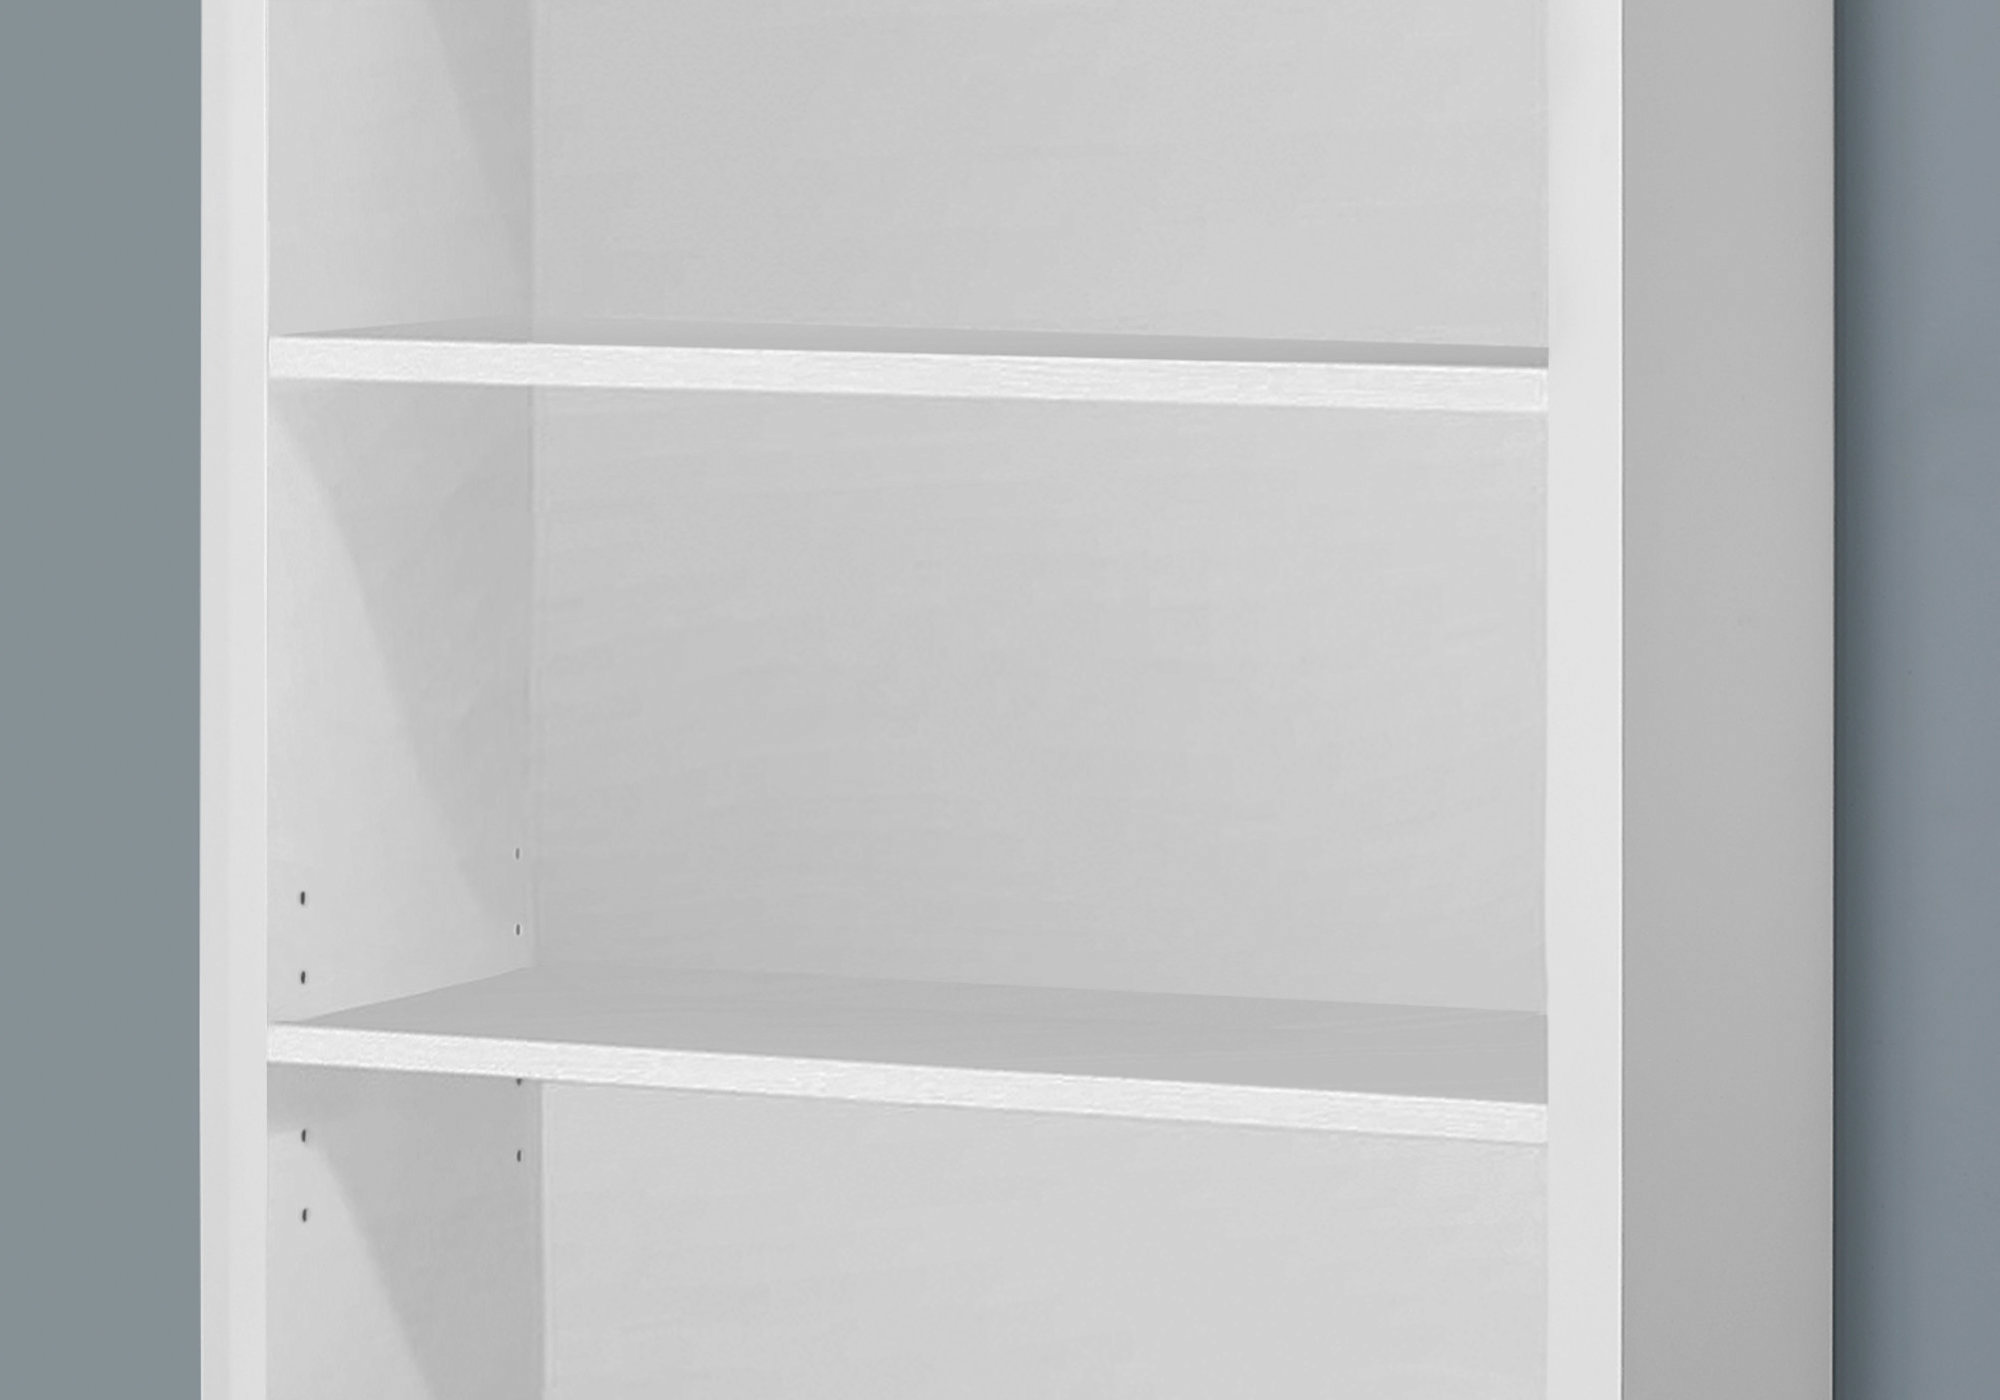 BOOKCASE - 48"H / WHITE WITH ADJUSTABLE SHELVES